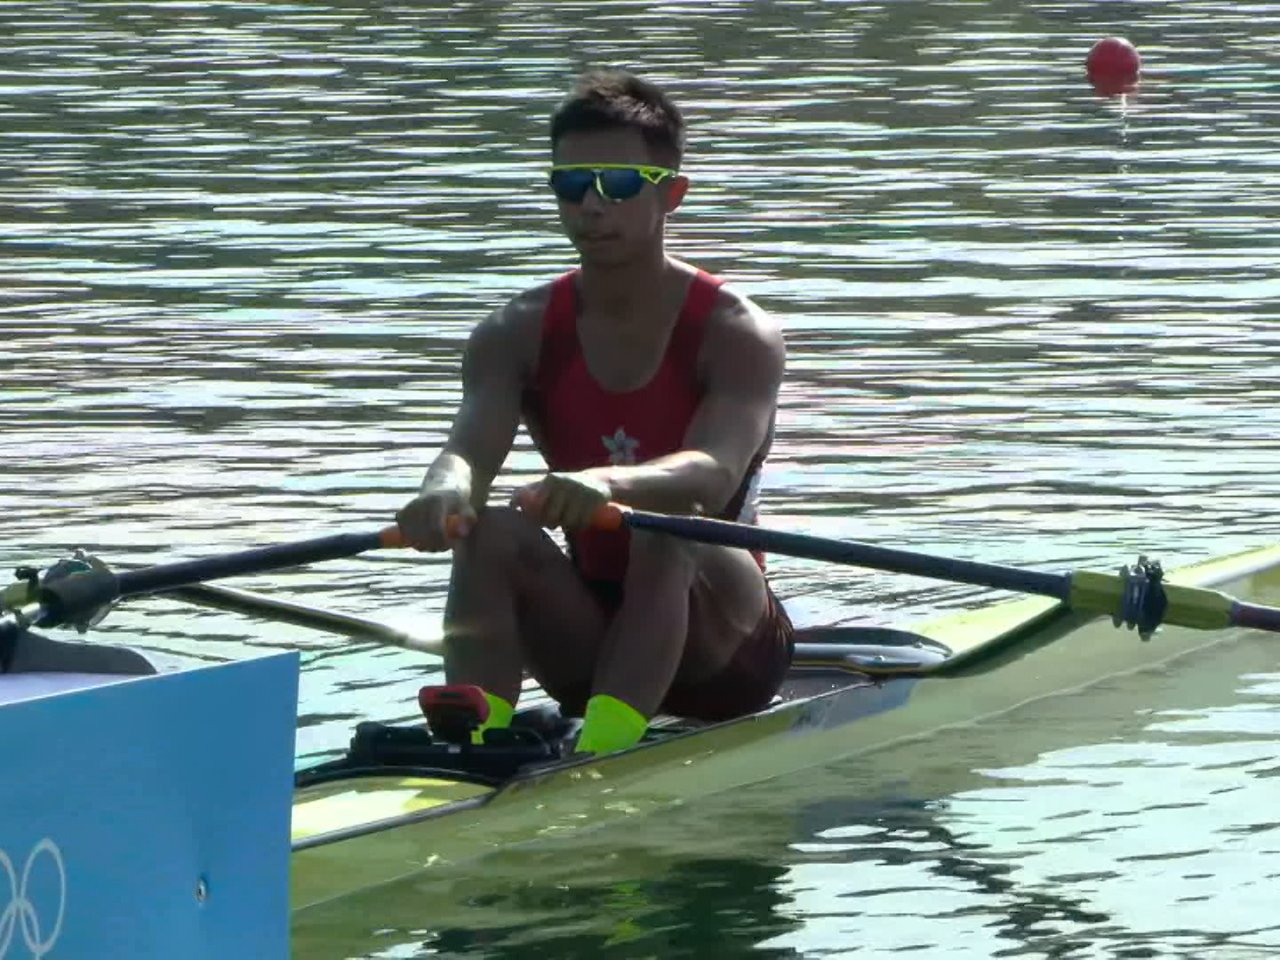 Hong Kong rower Chiu out of medal contention